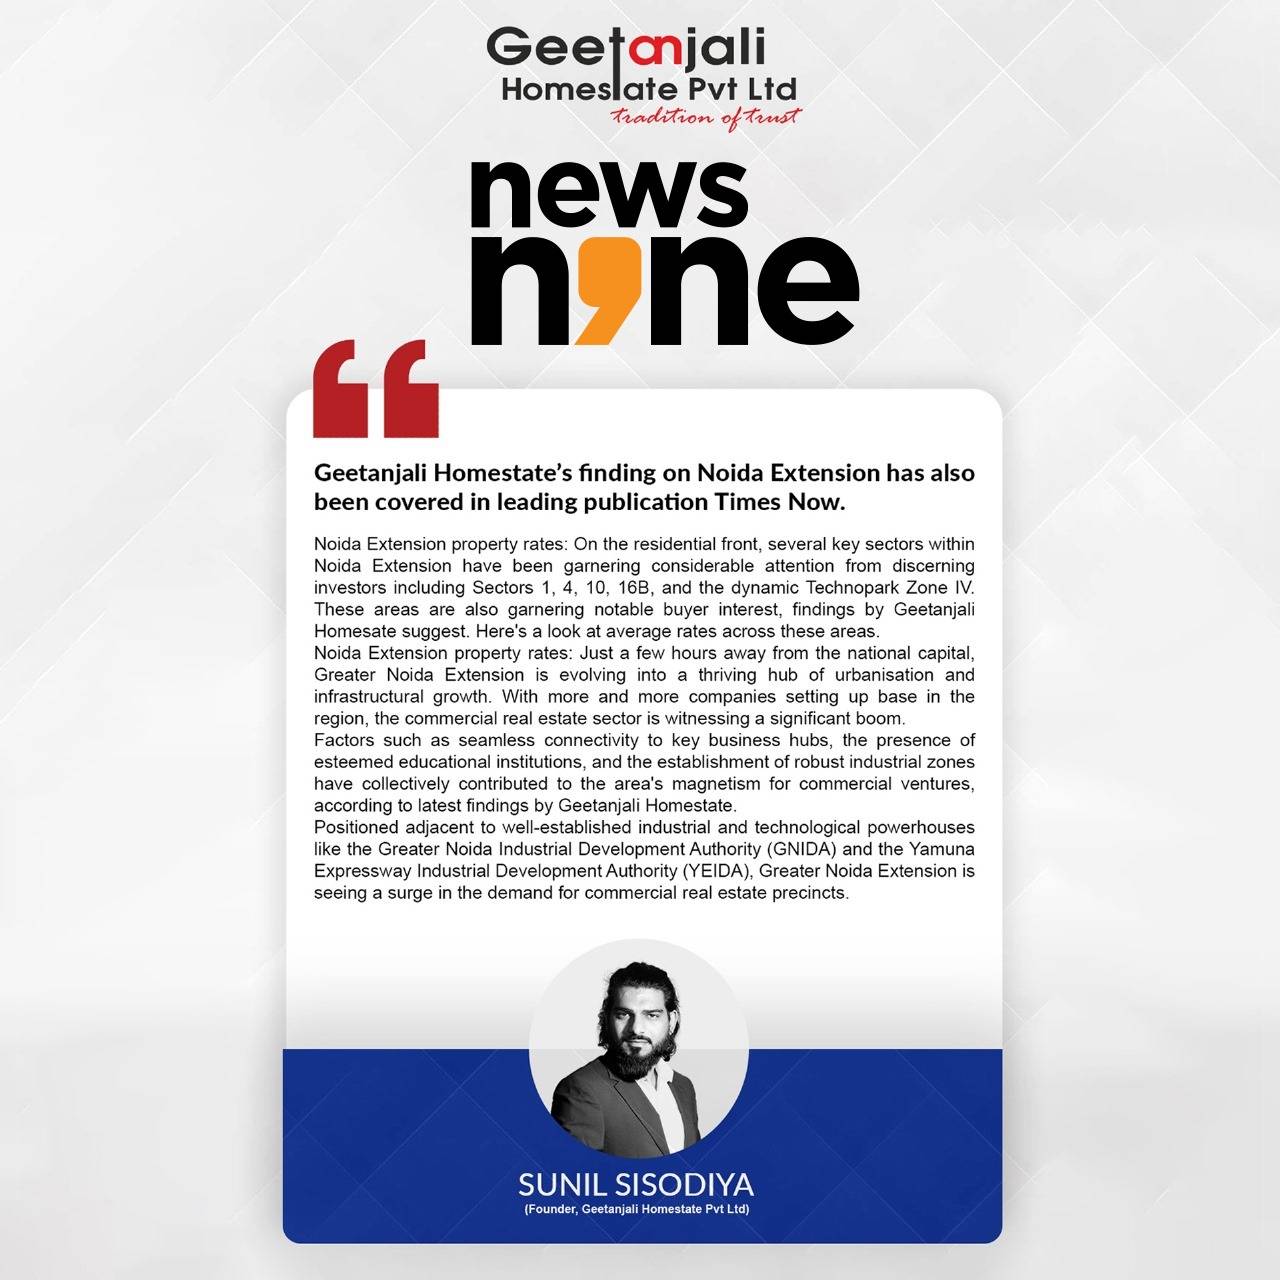 Geetanjali Homestate's Finding On Noida Extension Has Also Been Covered In Leading Publication News Nine